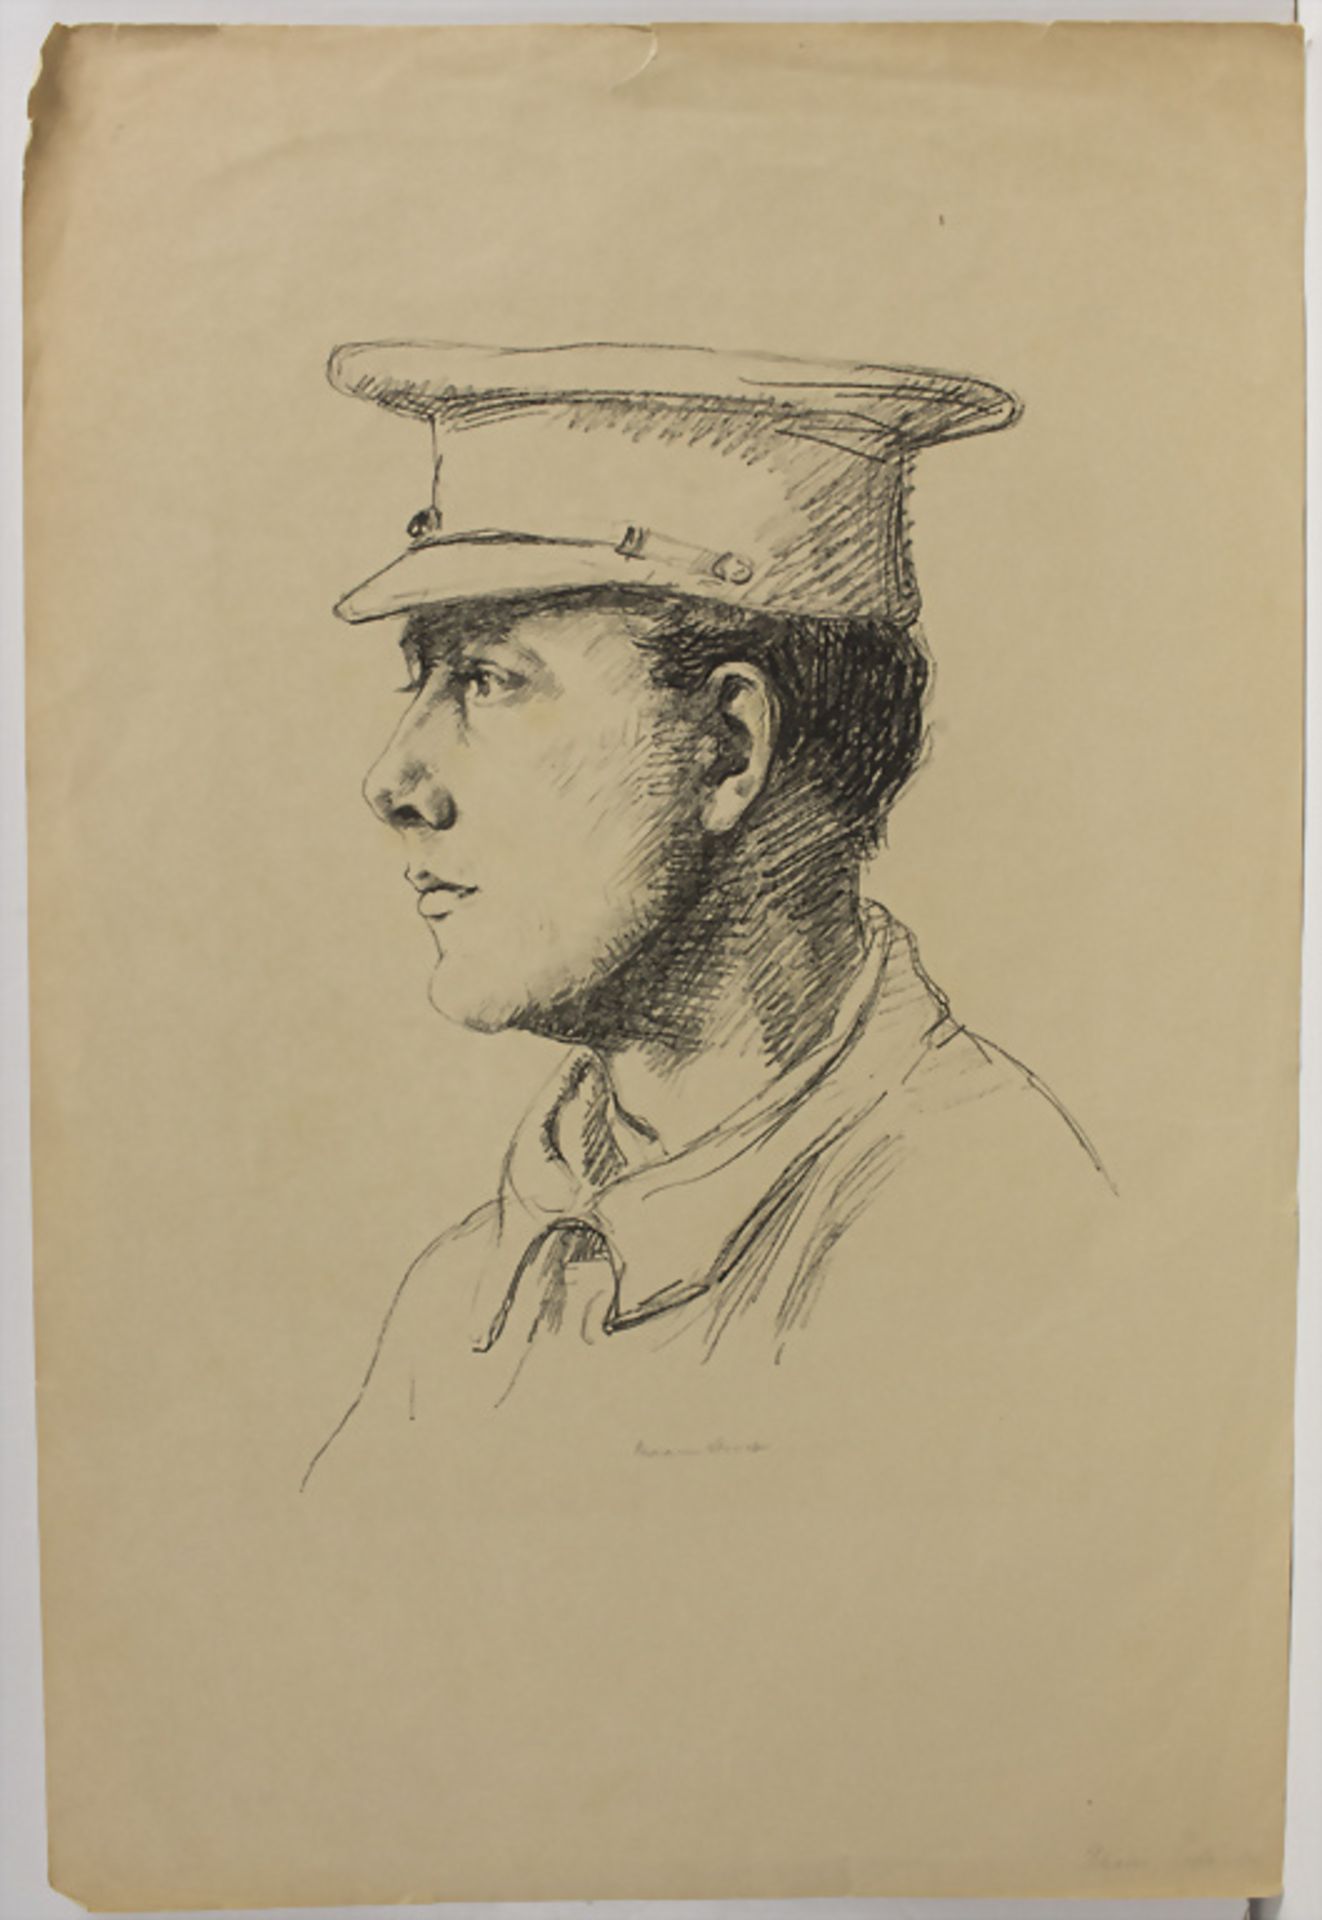 Hermann Struck (1876-1944), 'Roter Engländer' / 'Red English soldier', 20 Jh. - Image 2 of 4